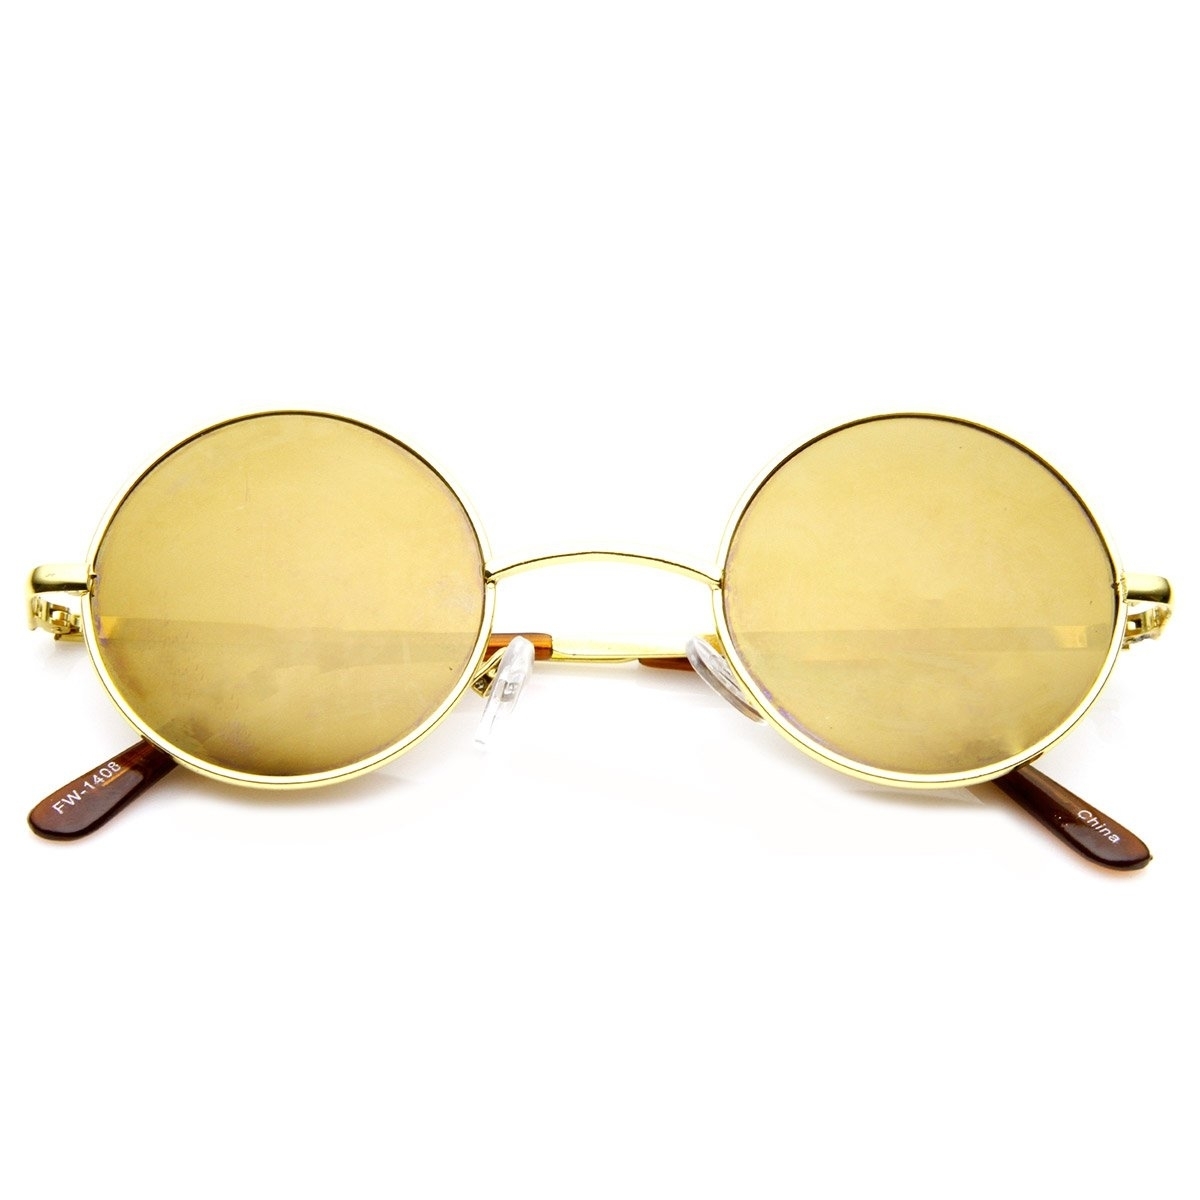 Lennon Style Round Circle Metal Sunglasses With Color Mirror Lens - Gold Gold-Mirror